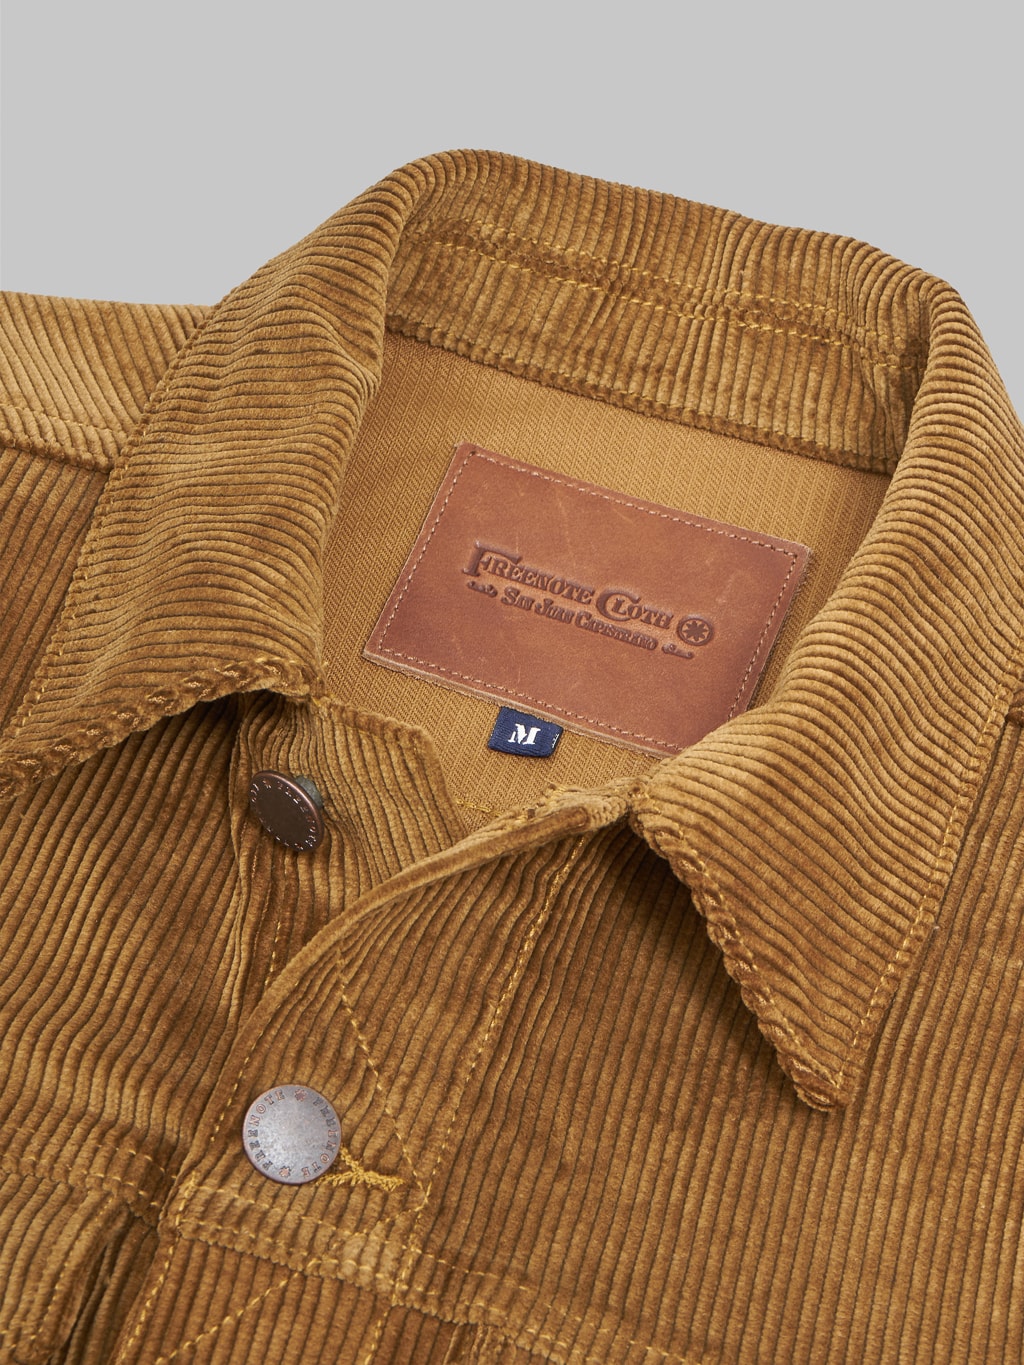 Freenote Cloth Classic Jacket Gold Corduroy leather patch